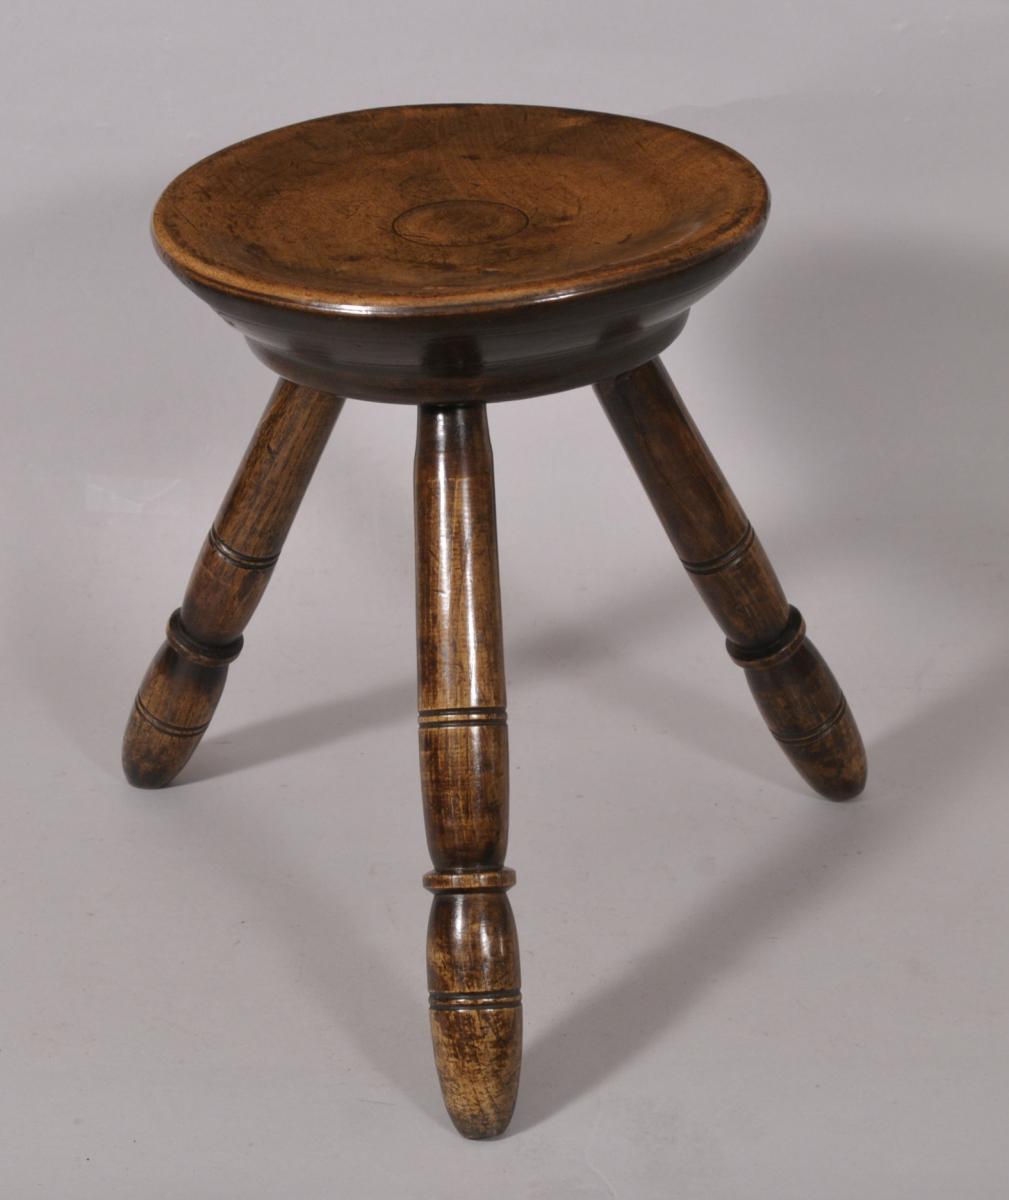 S/5058 Antique 19th Century Sycamore and Ash Stool